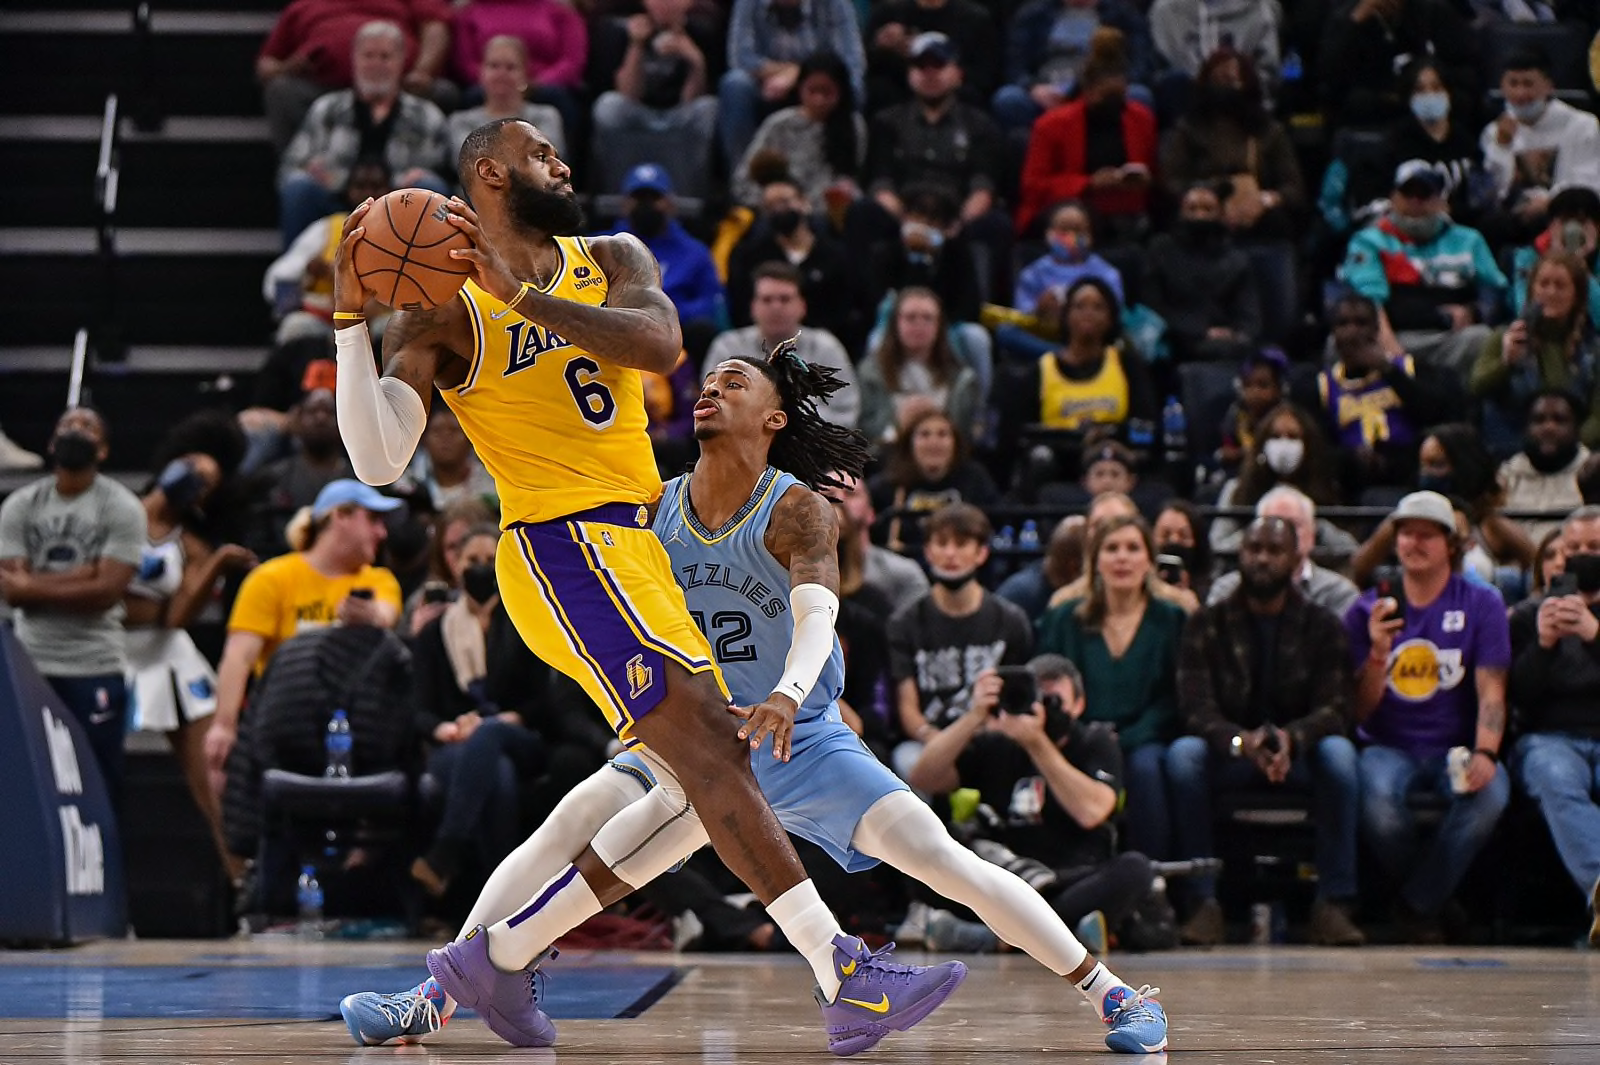 LeBron James reaches 36,000 career points as Los Angeles Lakers beat the  Houston Rockets